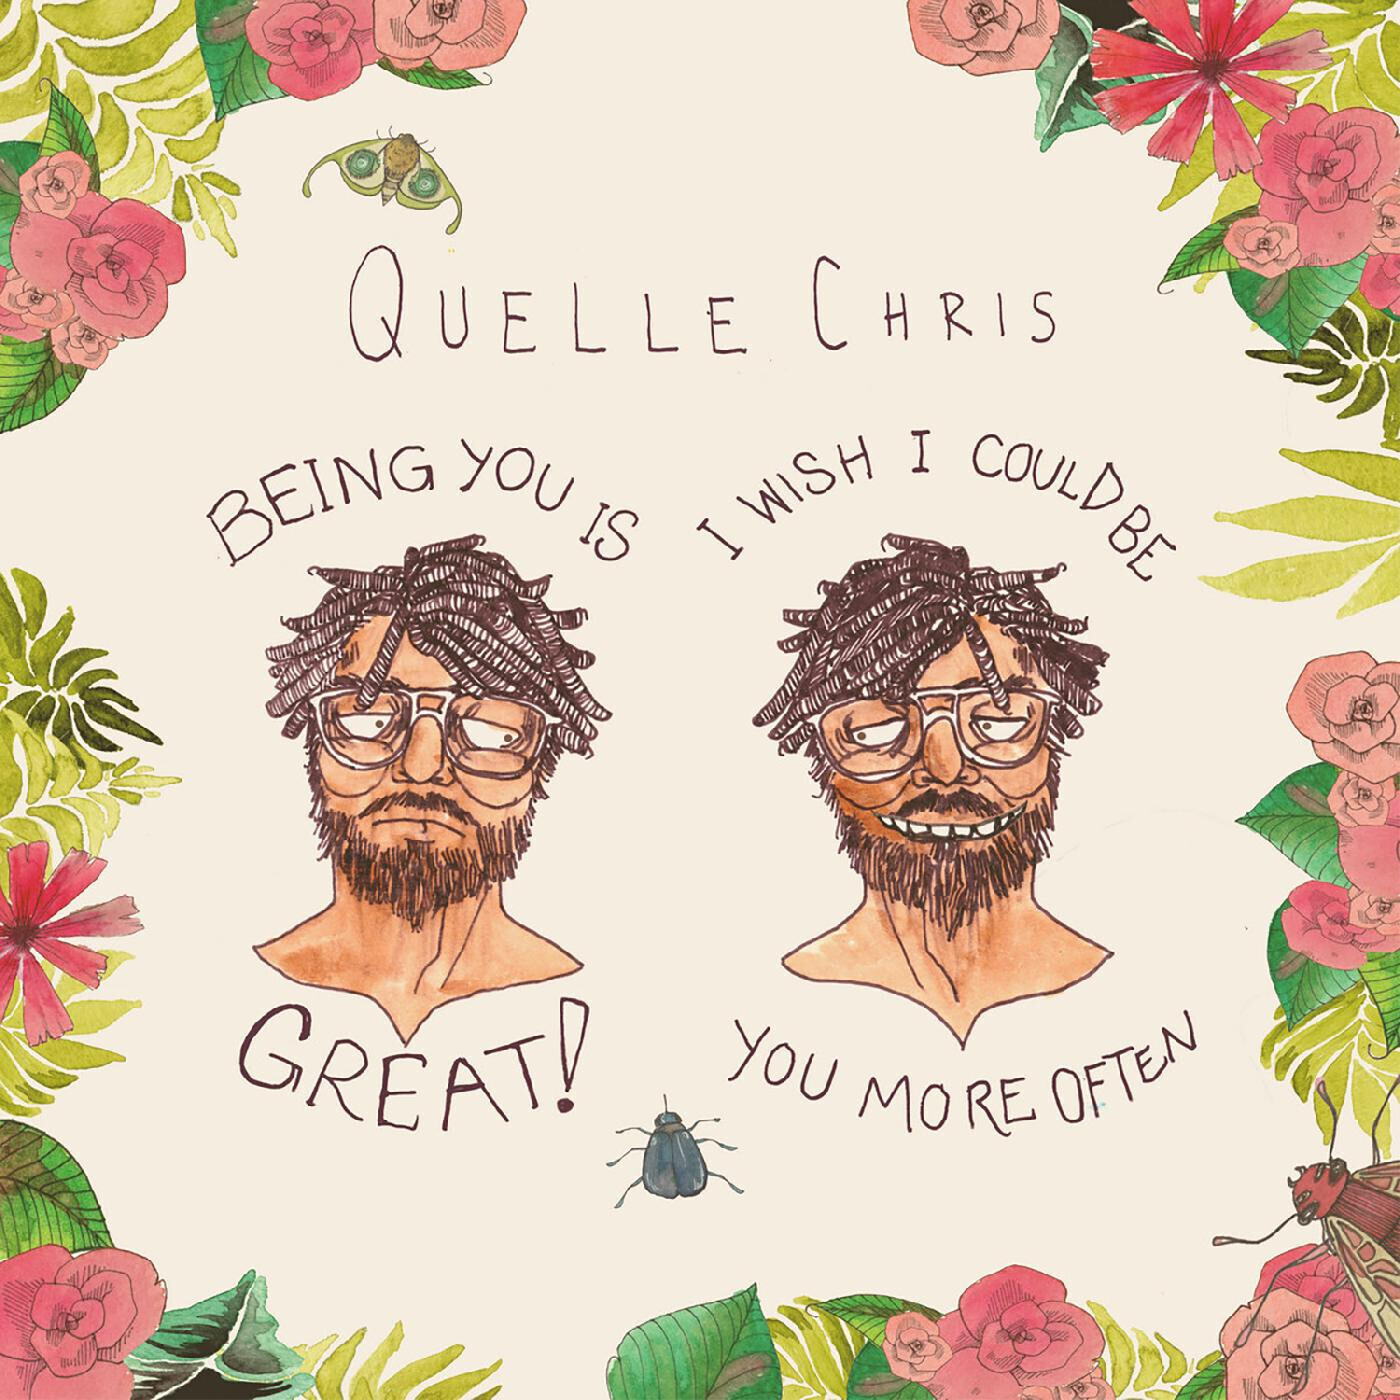 Quelle Chris "Being You Is Great, I Could Be You More Often" *Multi-Color Splatter Vinyl*